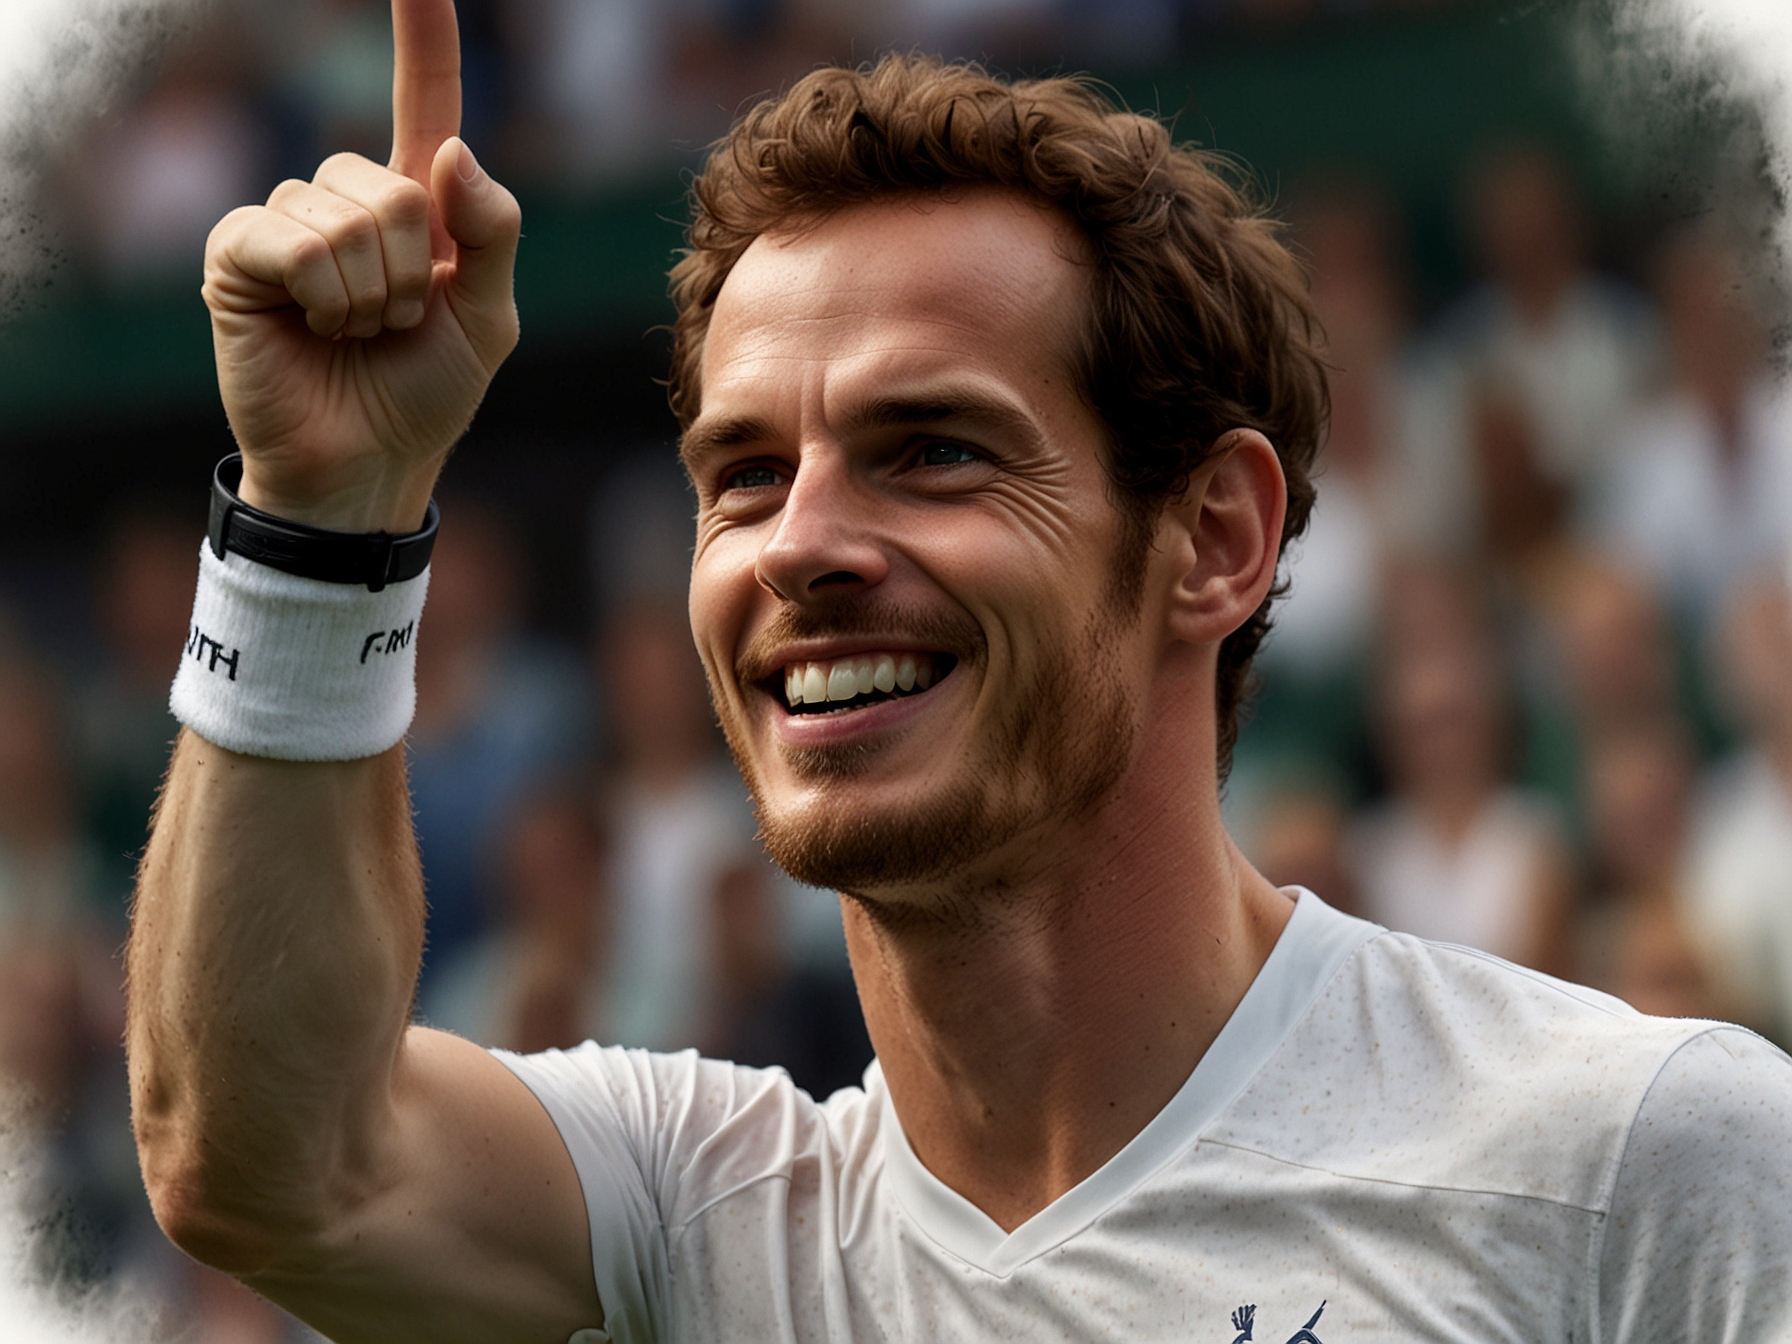 Andy Murray emotionally acknowledges the crowd at Wimbledon 2023, potentially his last appearance on the renowned grass courts, embodying his resilience and legacy.